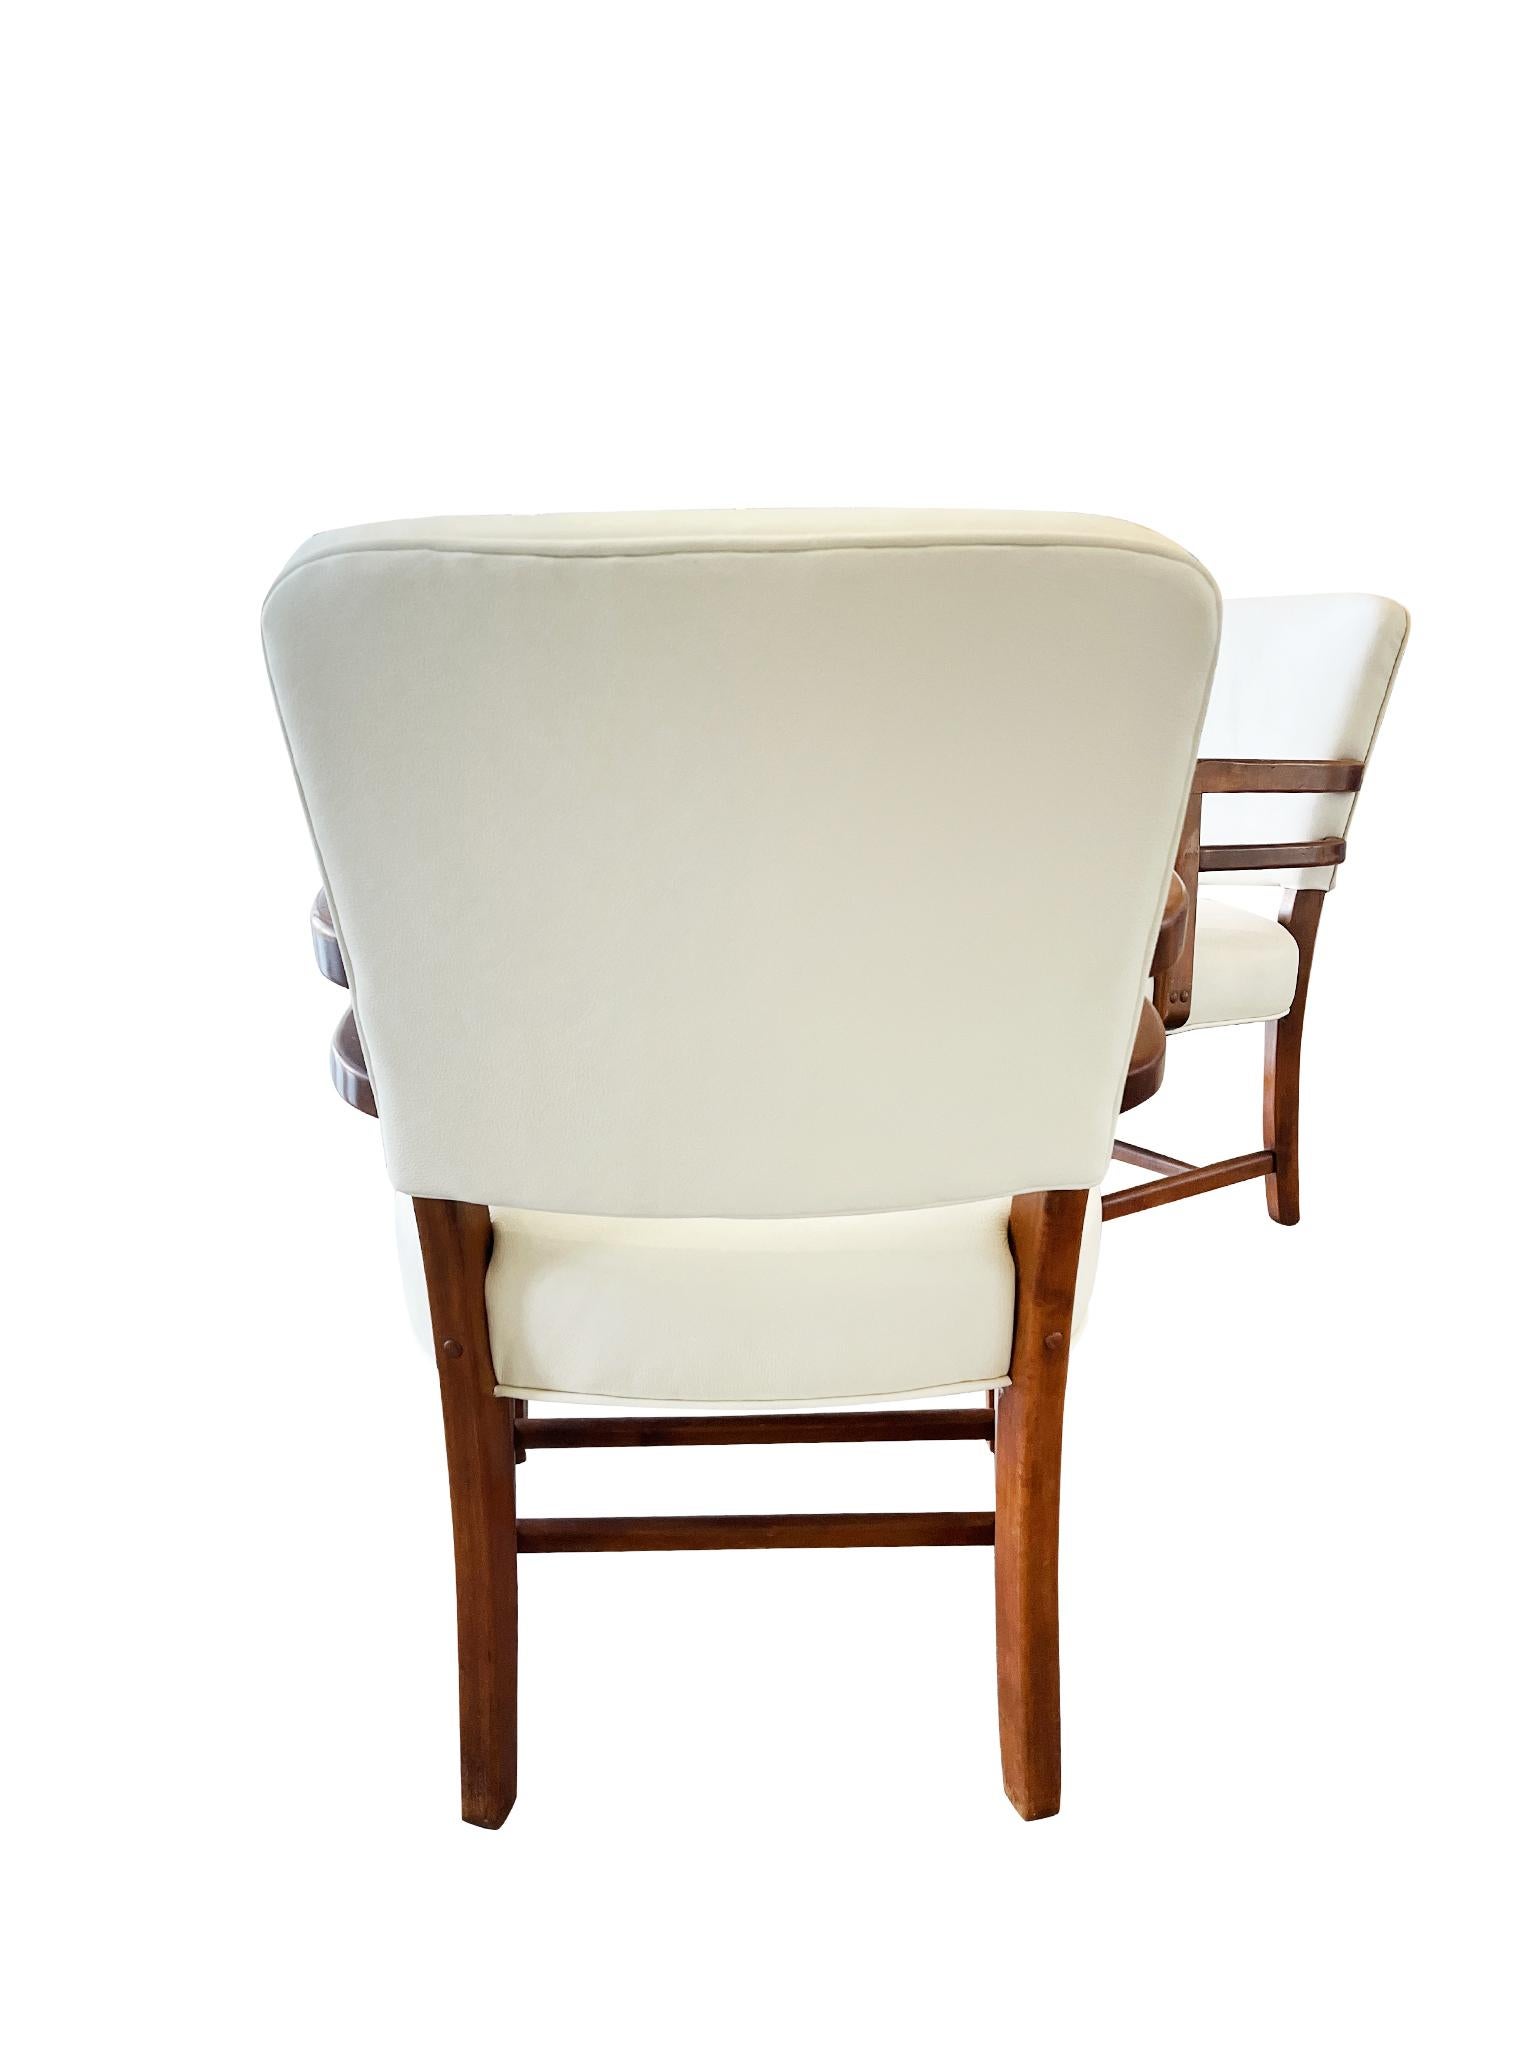 1930s English Art Deco Beech Armchairs in Oyster White Leather, a Pair In Good Condition For Sale In New York, NY